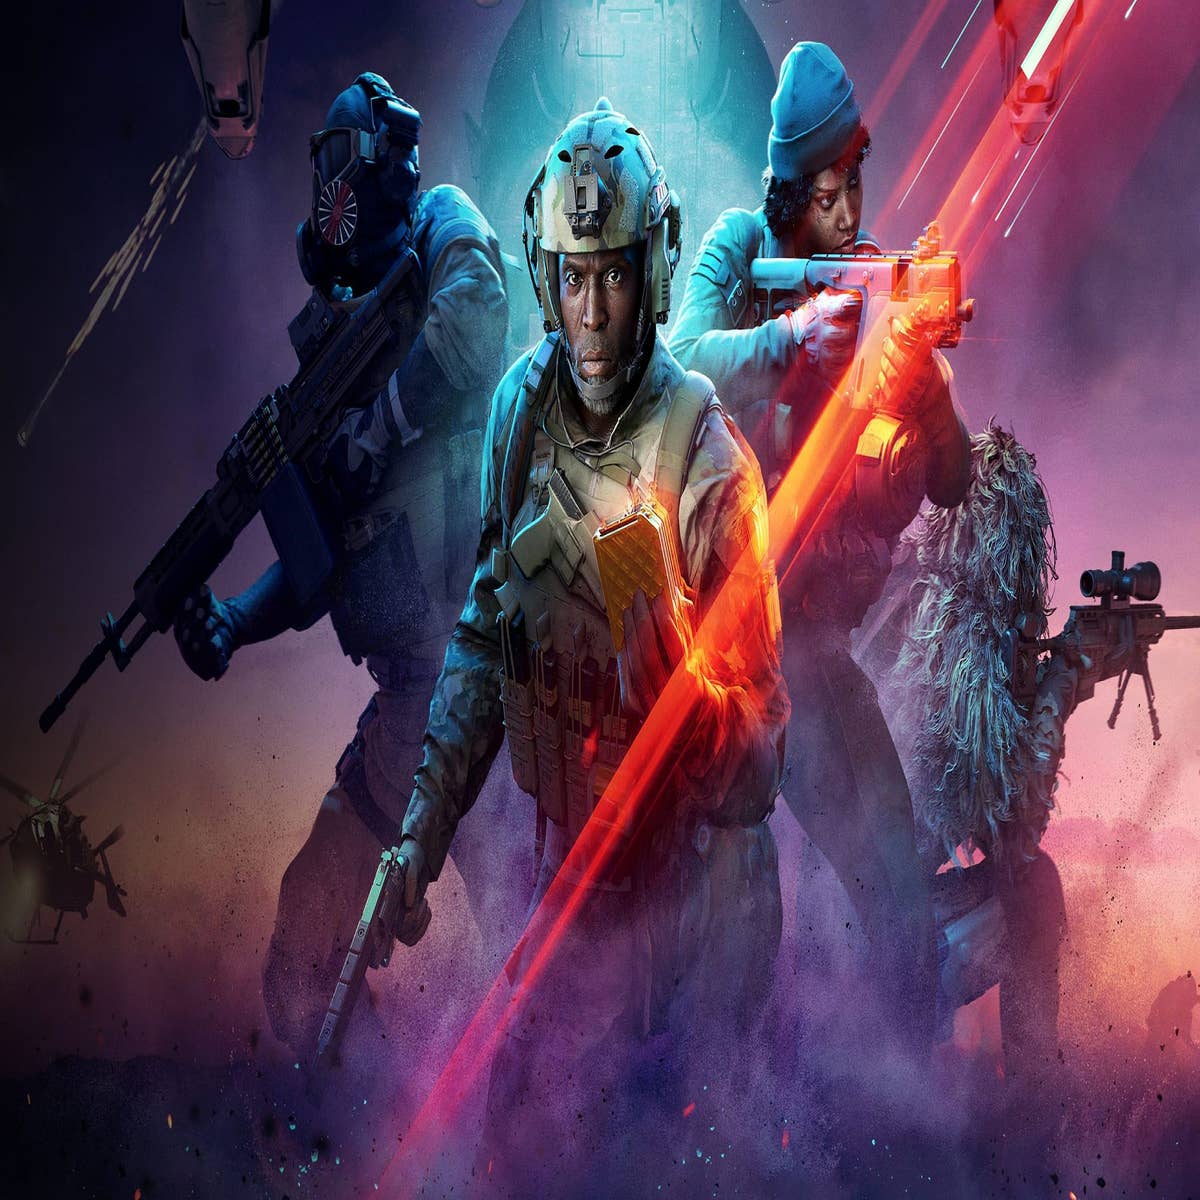 UPDATE] Free Battlefield V on Steam from August 26th?